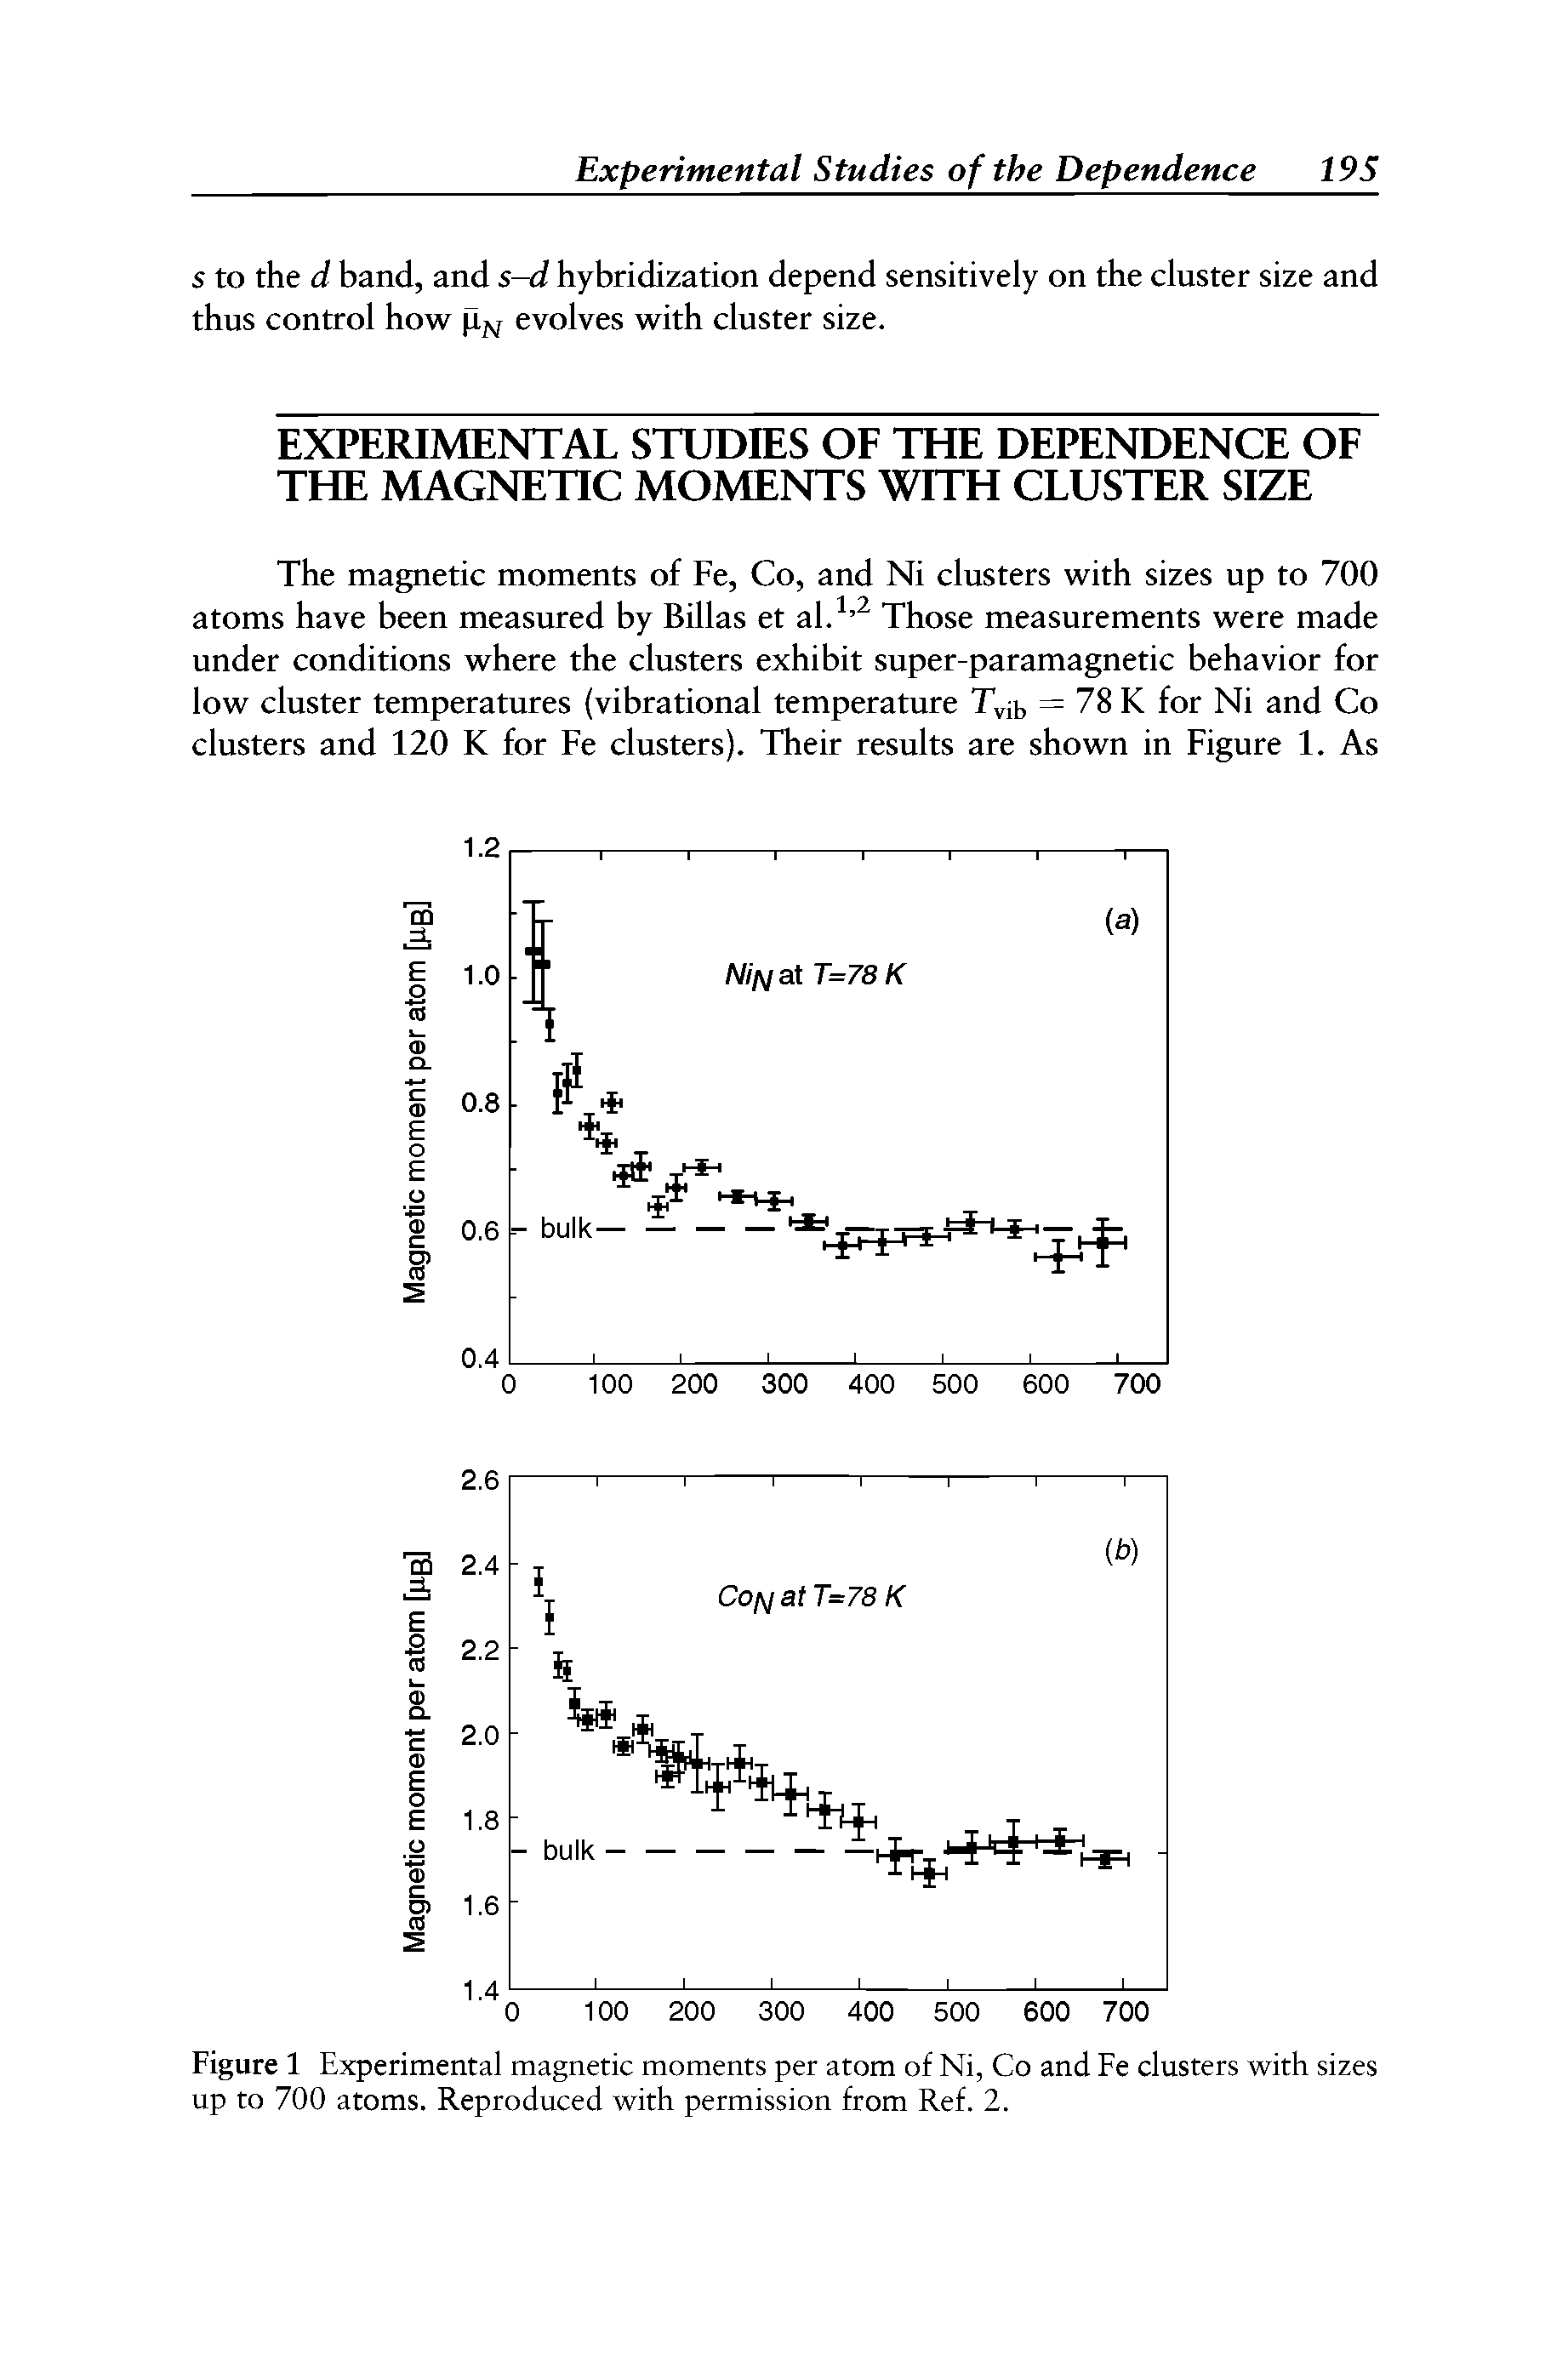 Figure 1 Experimental magnetic moments per atom of Ni, Co and Fe clusters with sizes up to 700 atoms. Reproduced with permission from Ref. 2.